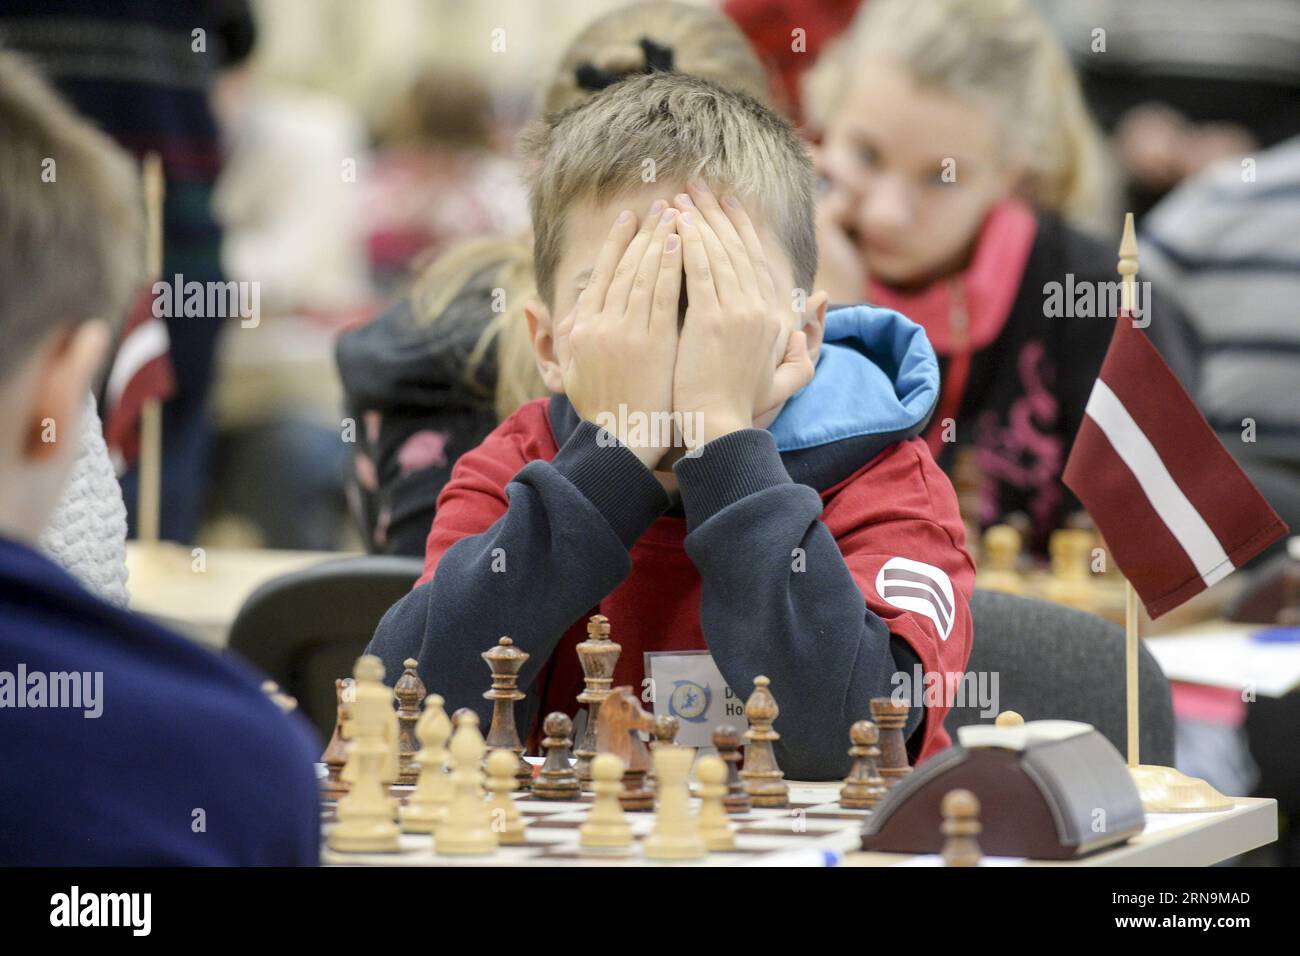 (151211) -- NARVA, Dec. 11, 2015 -- A young chess player covers his face during The Starts of the Baltic Sea chess tournament in Narva, third largest city of Estonia, on Dec. 11, 2015. Sixty young chess players aged 10 to 18 years old from Russia, Estonia, Finland, Latvia and Lithuania competed for the best World Chess Federation (FIDE) rating at this game. The game starts the FIDE celebration of 100 years of World famous Estonian Grandmaster Paul Keres (1916-1975) who was among the world s top players from the mid-1930s to the mid-1960s. Paul Keres was originally from Narva. ) (SP)ESTONIA-NAR Stock Photo